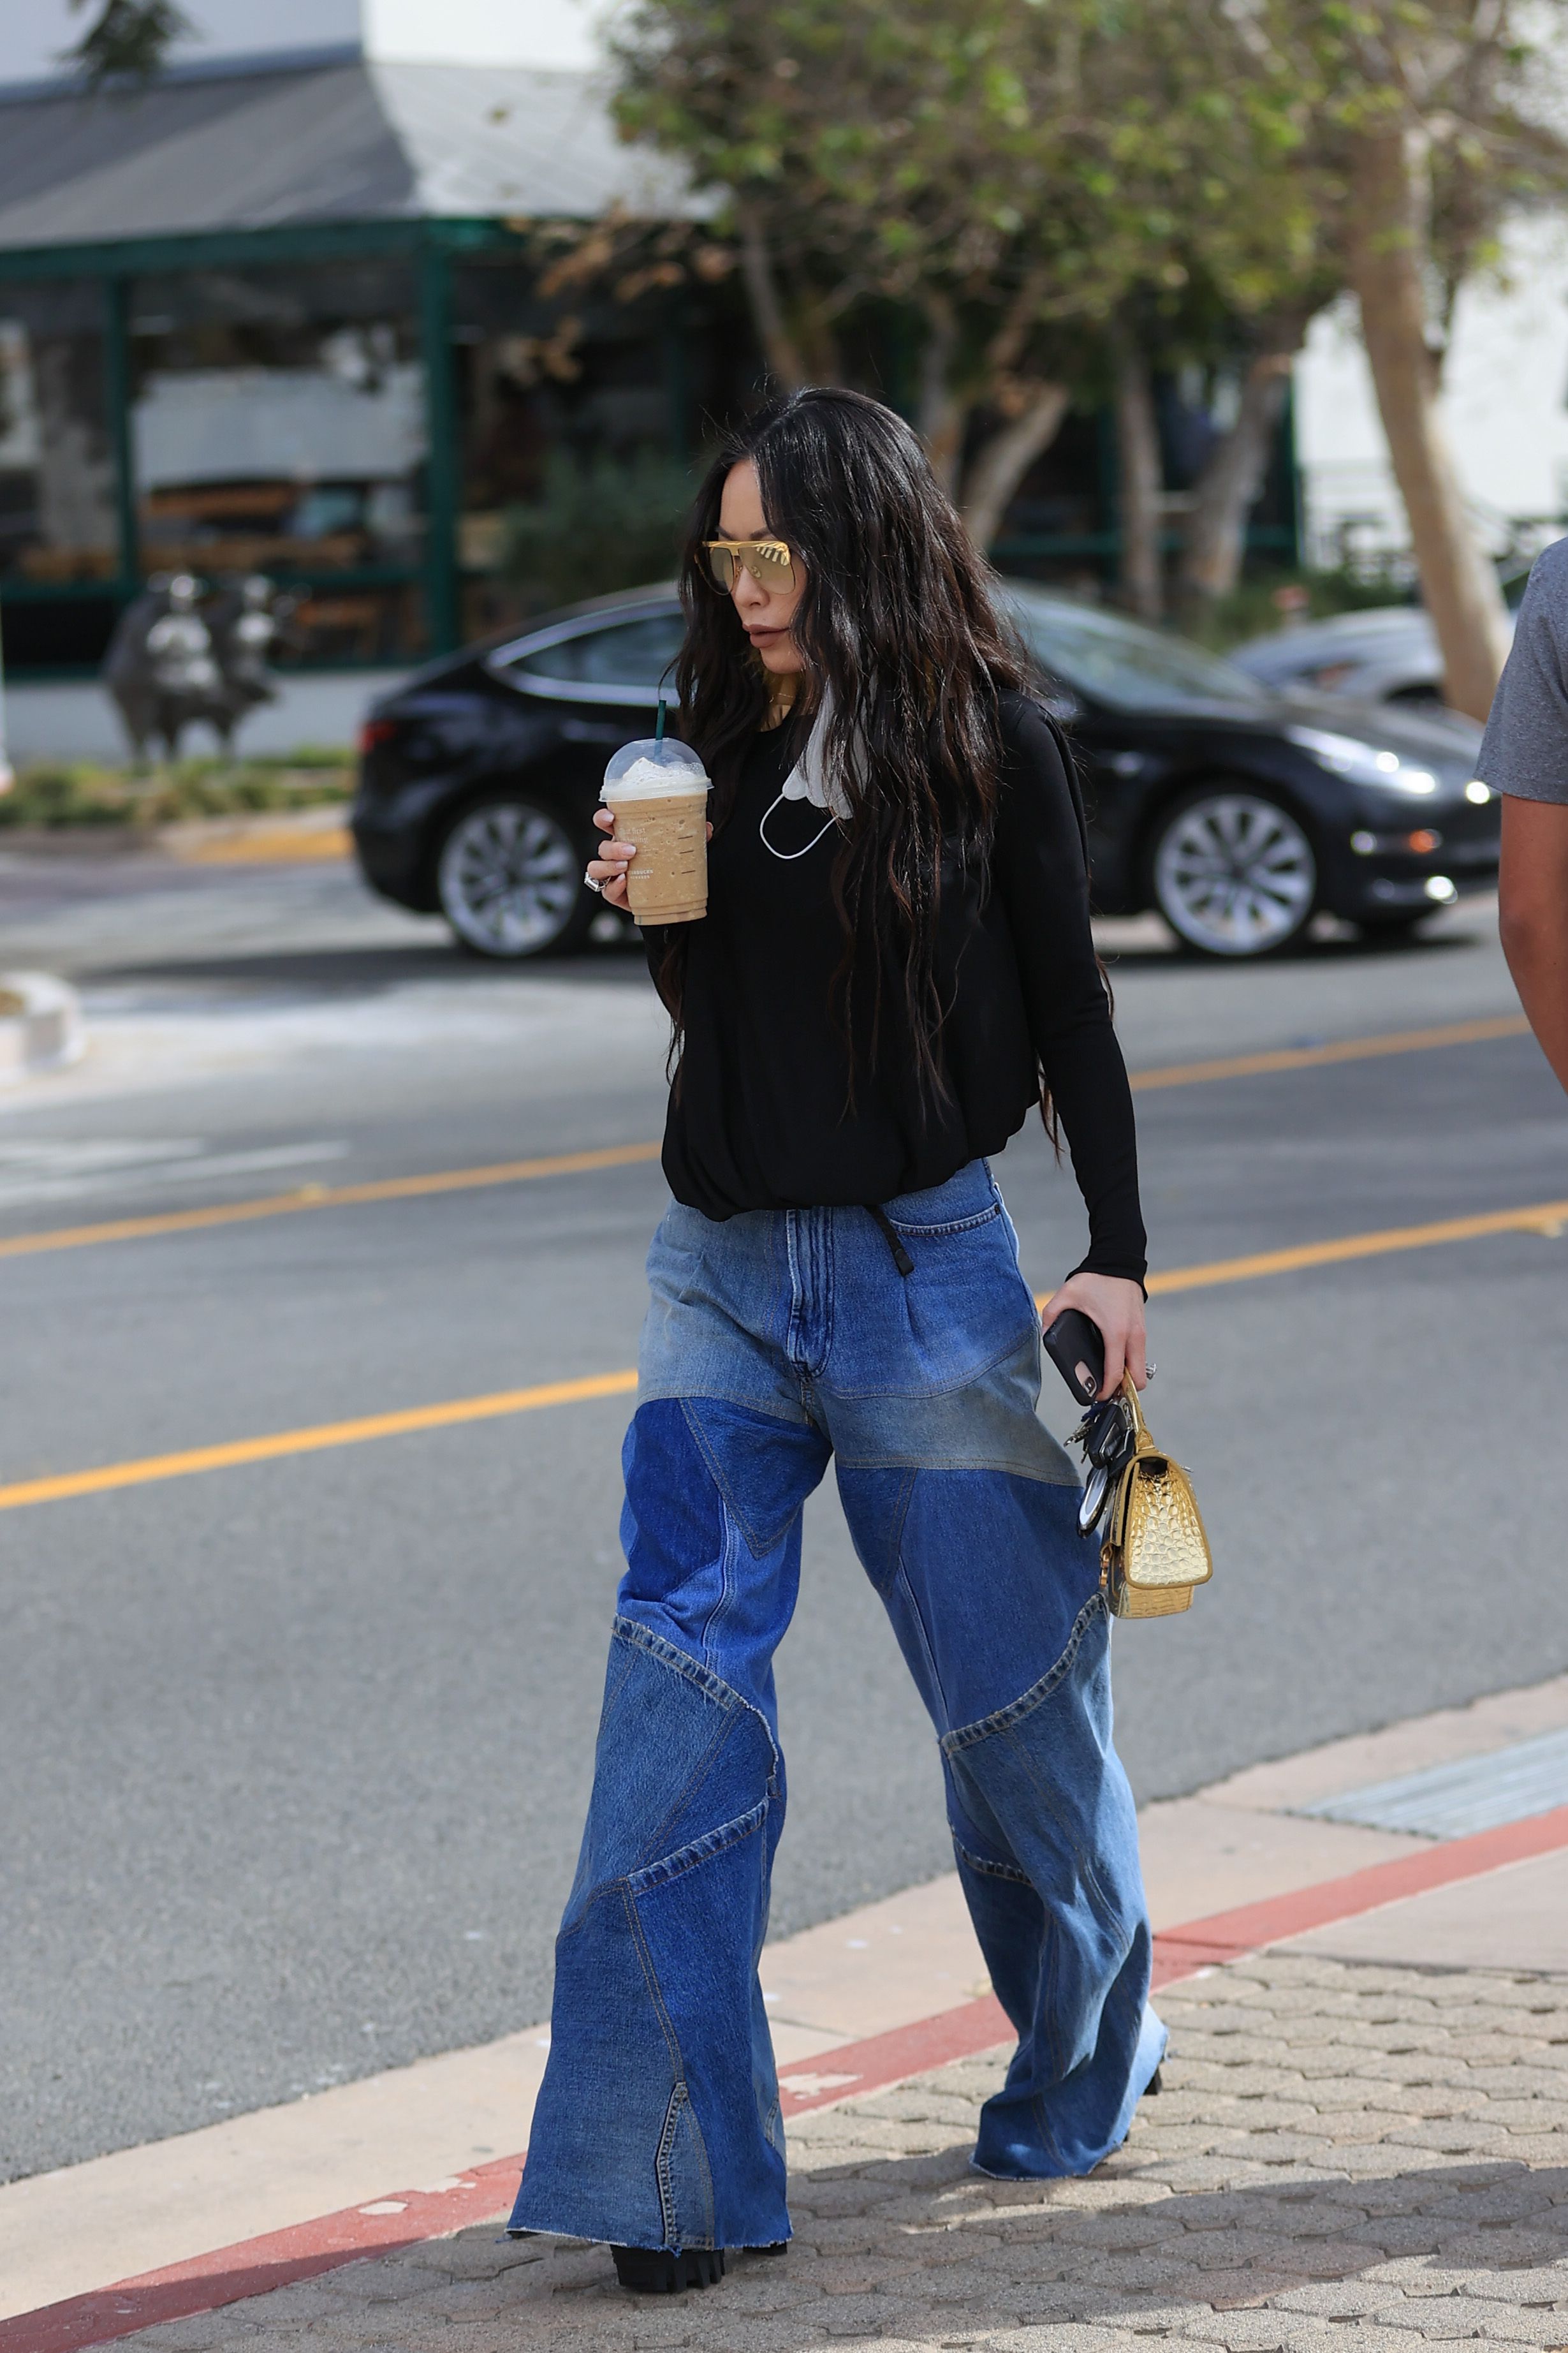 Bling Empire's Christine Chiu makes the case for patchwork jeans